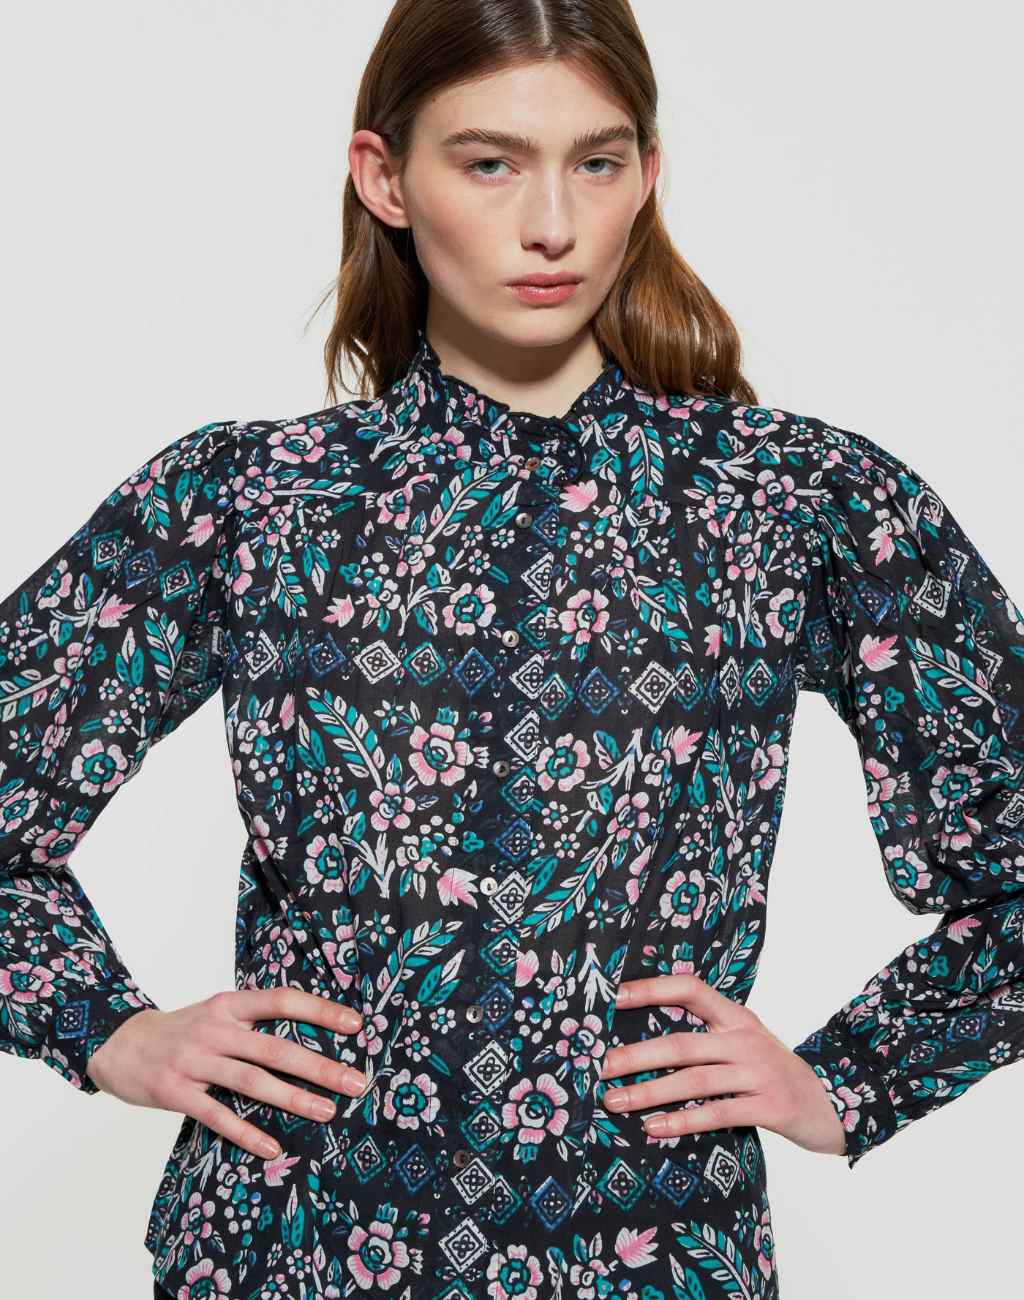 Block Print Flora Blouse with Floral and Geometric Print, Ruffle Collar, and Puffed Sleeves - Visit Nifty Antik Batik 